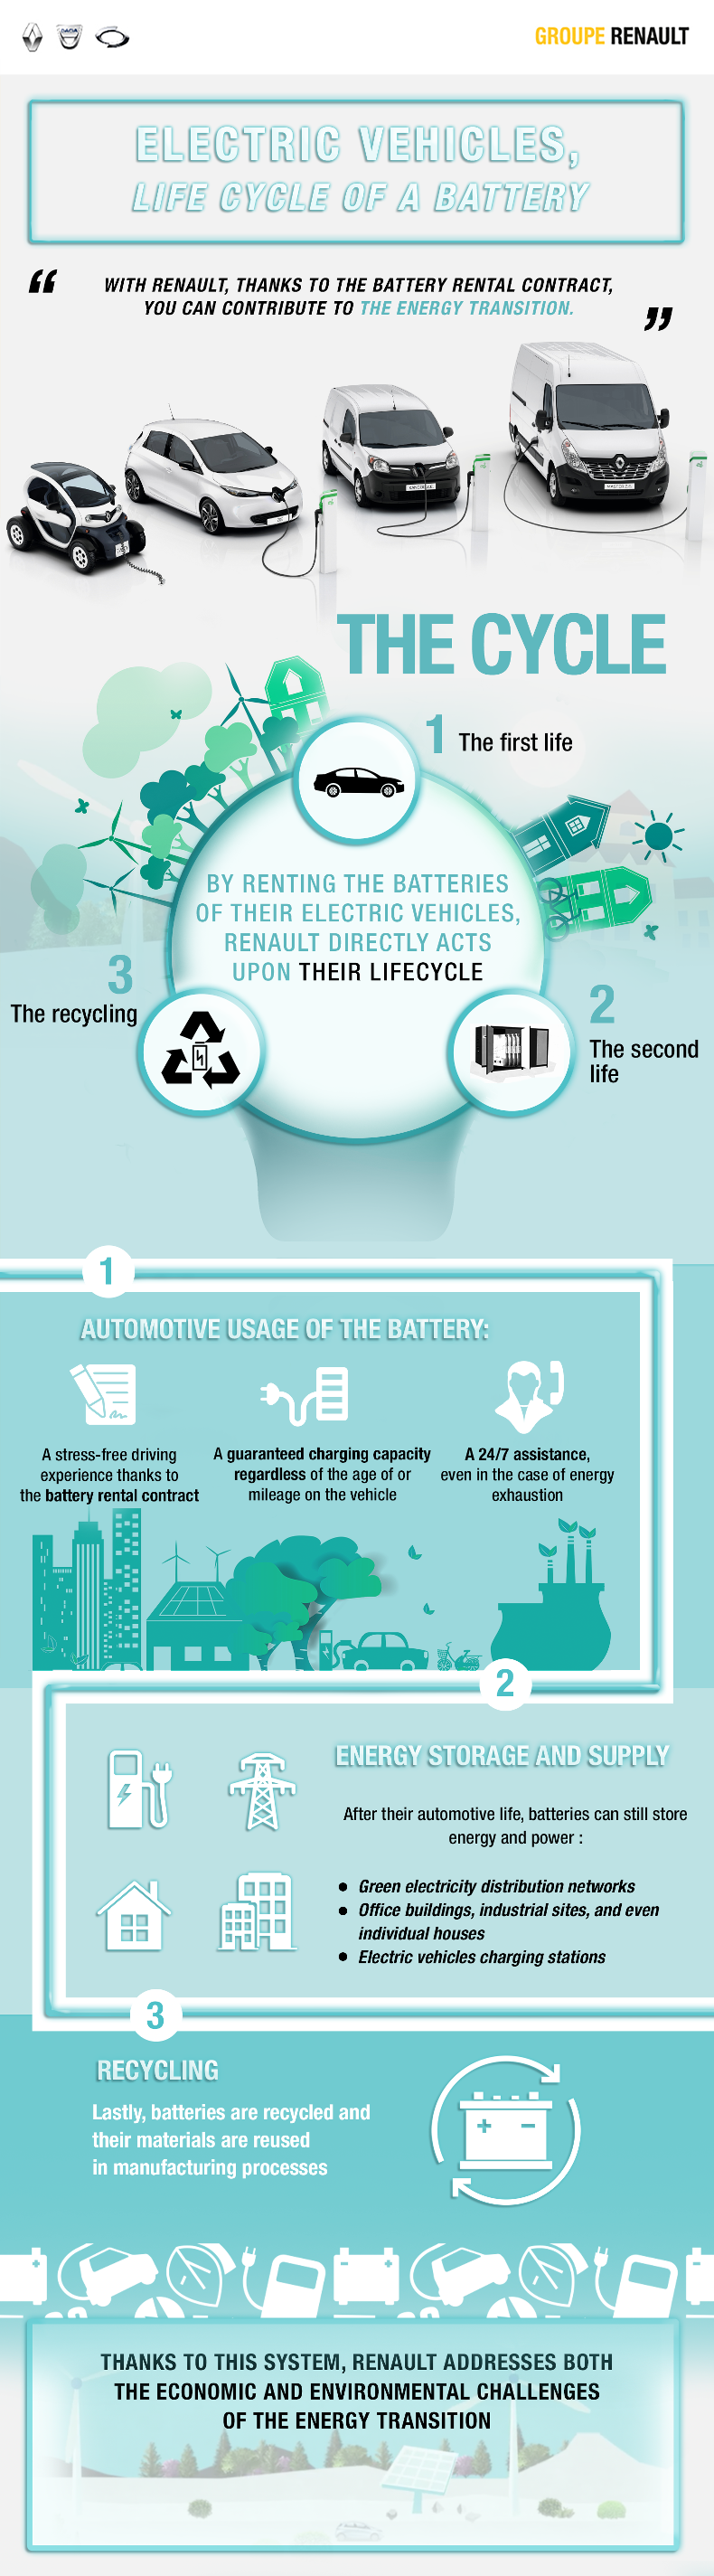 Renault optimizes the lifecycle of its electric vehicle batteries